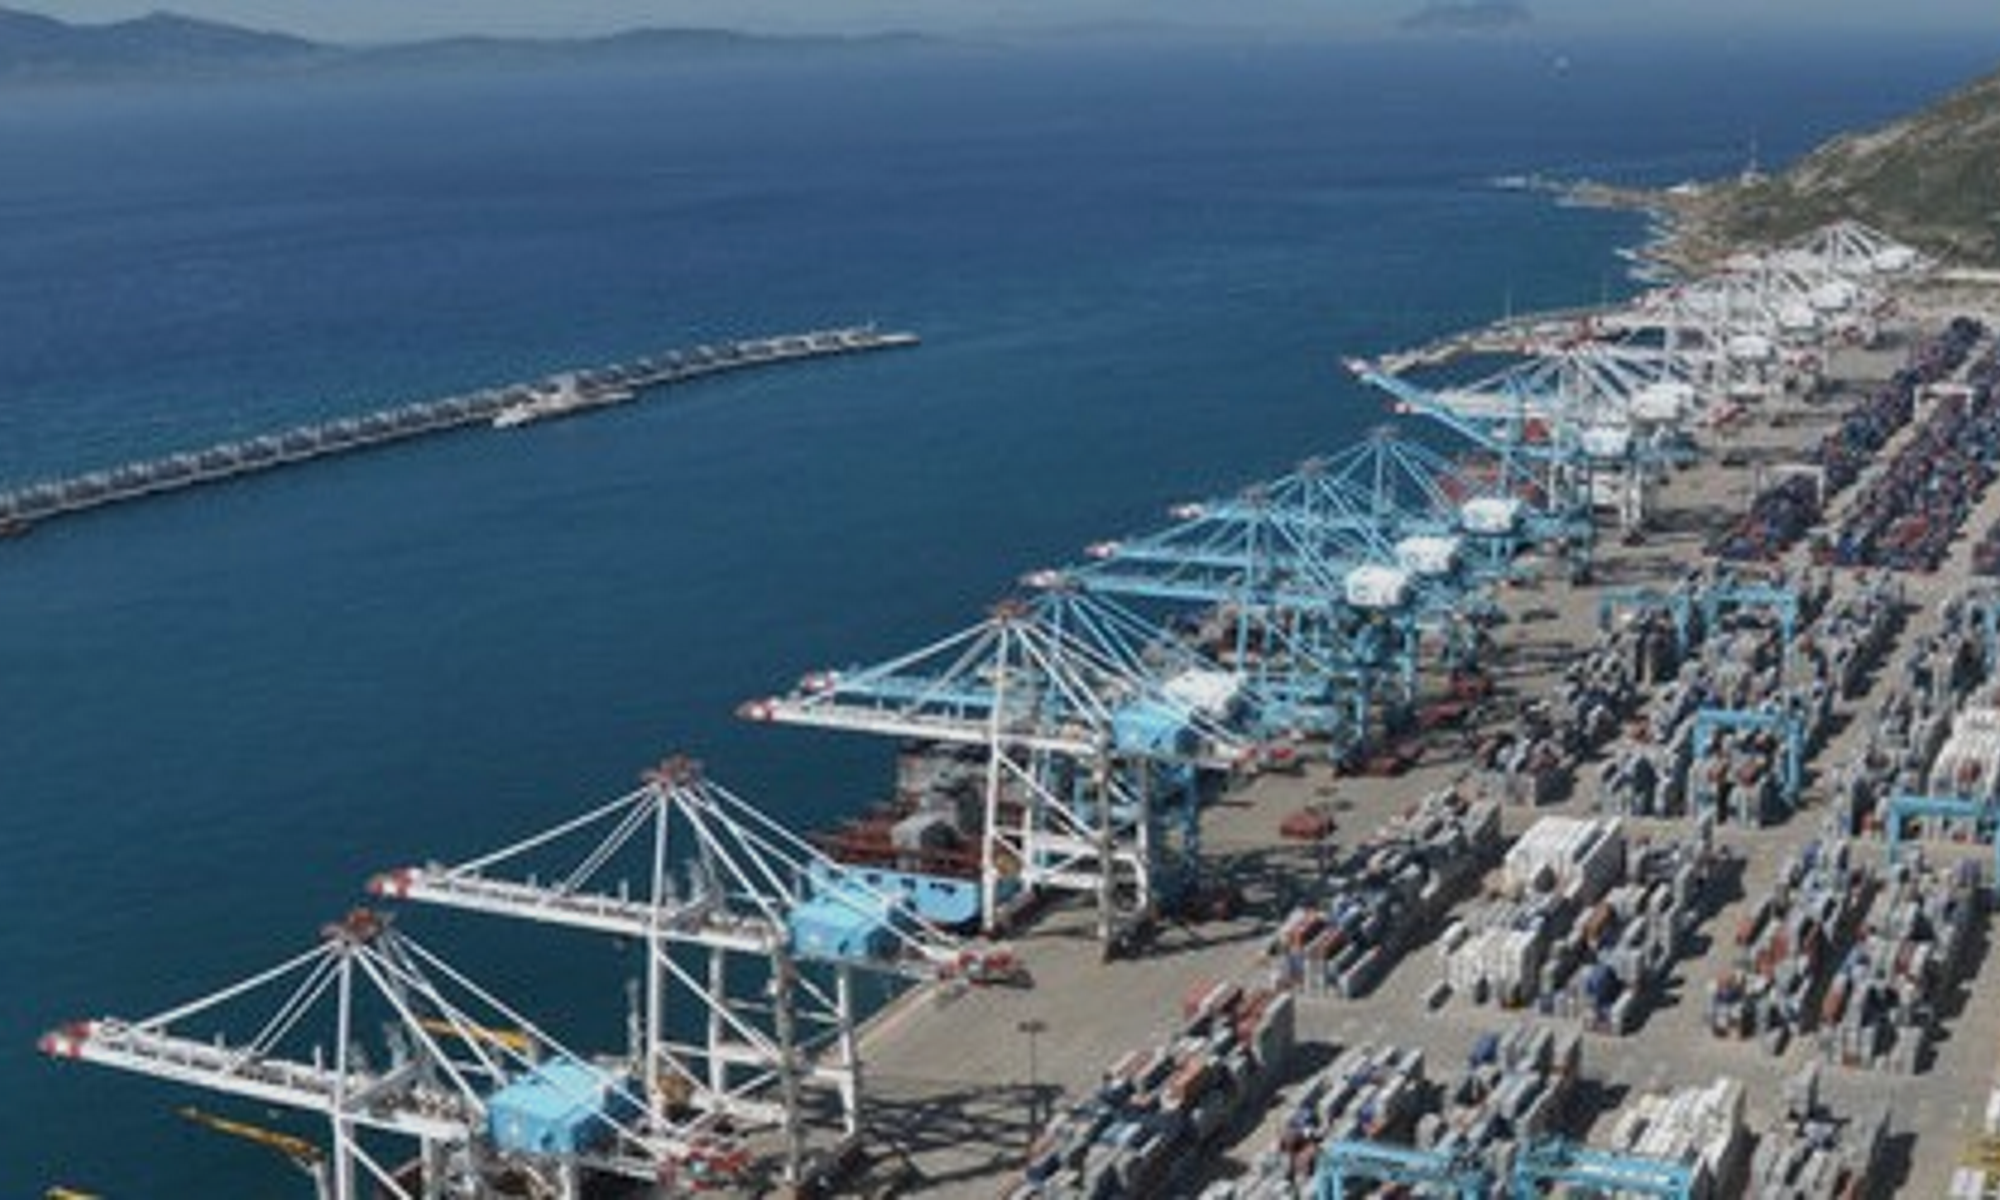 Morocco’s Tanger Med Port Handles 4.8 mln Containers in 2019